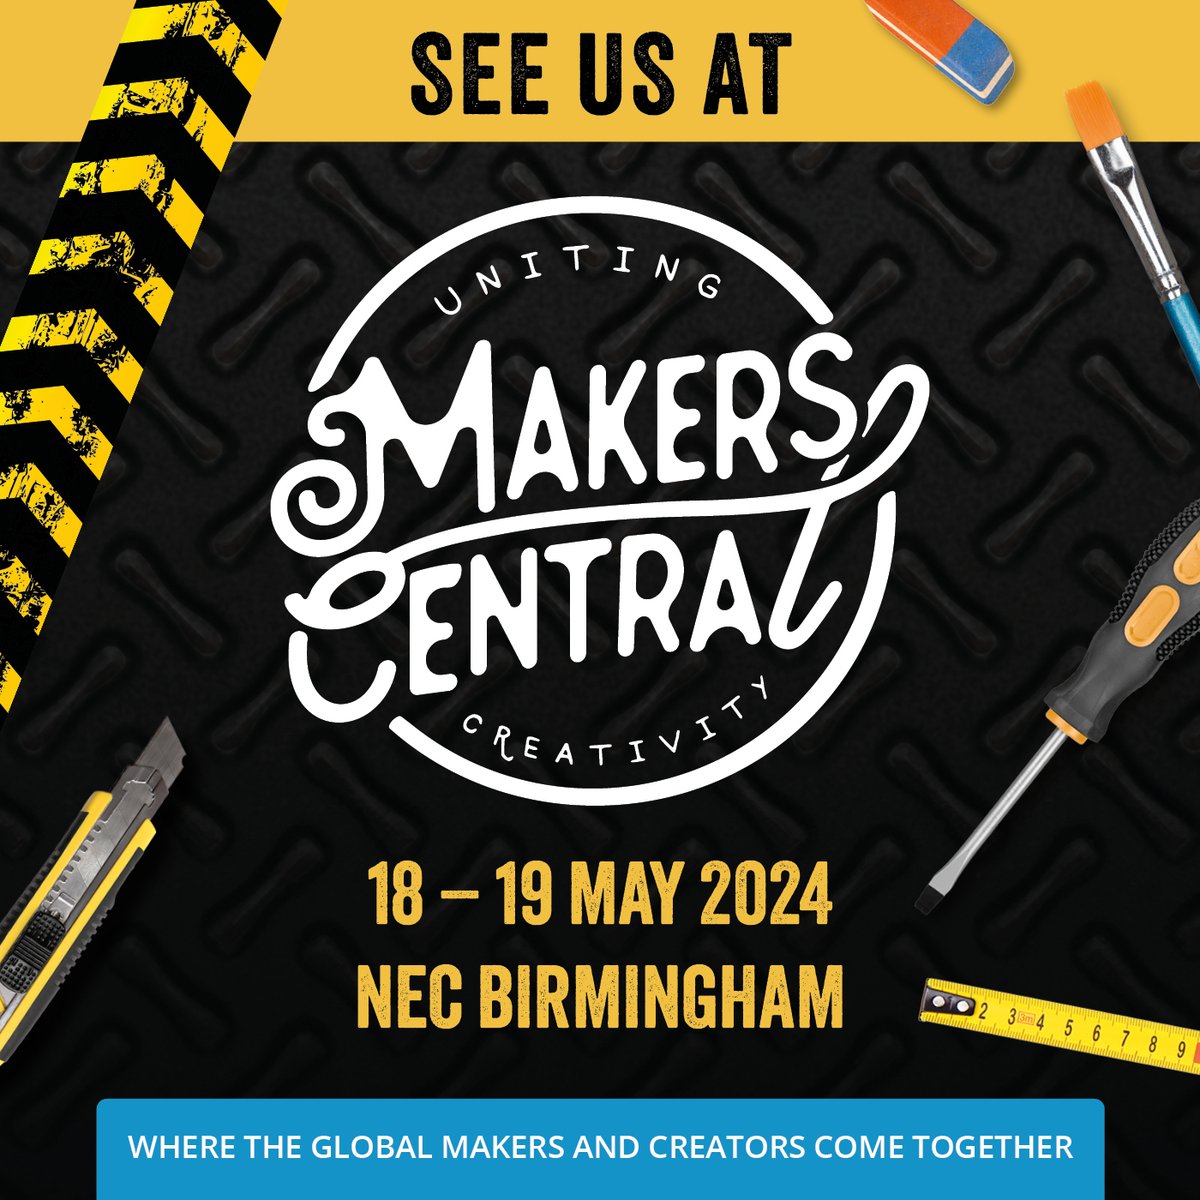 🎉 We'll be exhibiting at the Central Makers event this weekend - stand B15! 🎨 Join us for an incredible experience filled with creativity, innovation, and fun. 🗓️ Date: 10am - 4.30pm, 18 - 19 May 2024 📍 Location: National Exhibition Centre, Birmingham, B40 1NT See you there!